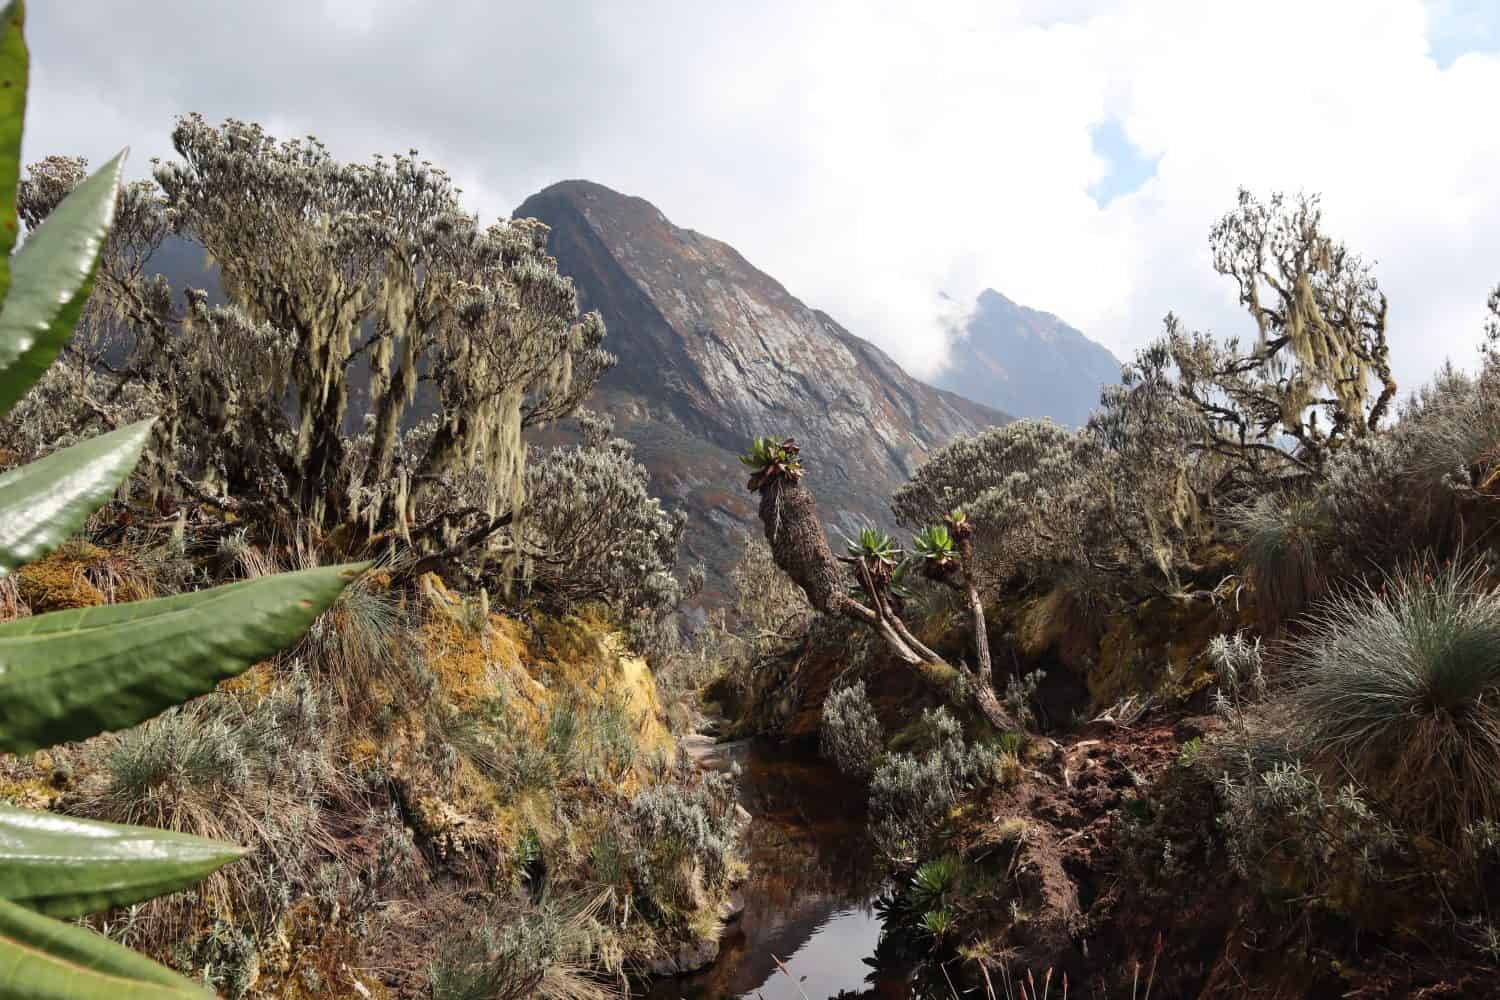 A pool of water on a pass near Mount Baker (4843m) in the Rwenzori Mountains in Uganda, also known as the Mountains of the Moon. Feb, 2019.